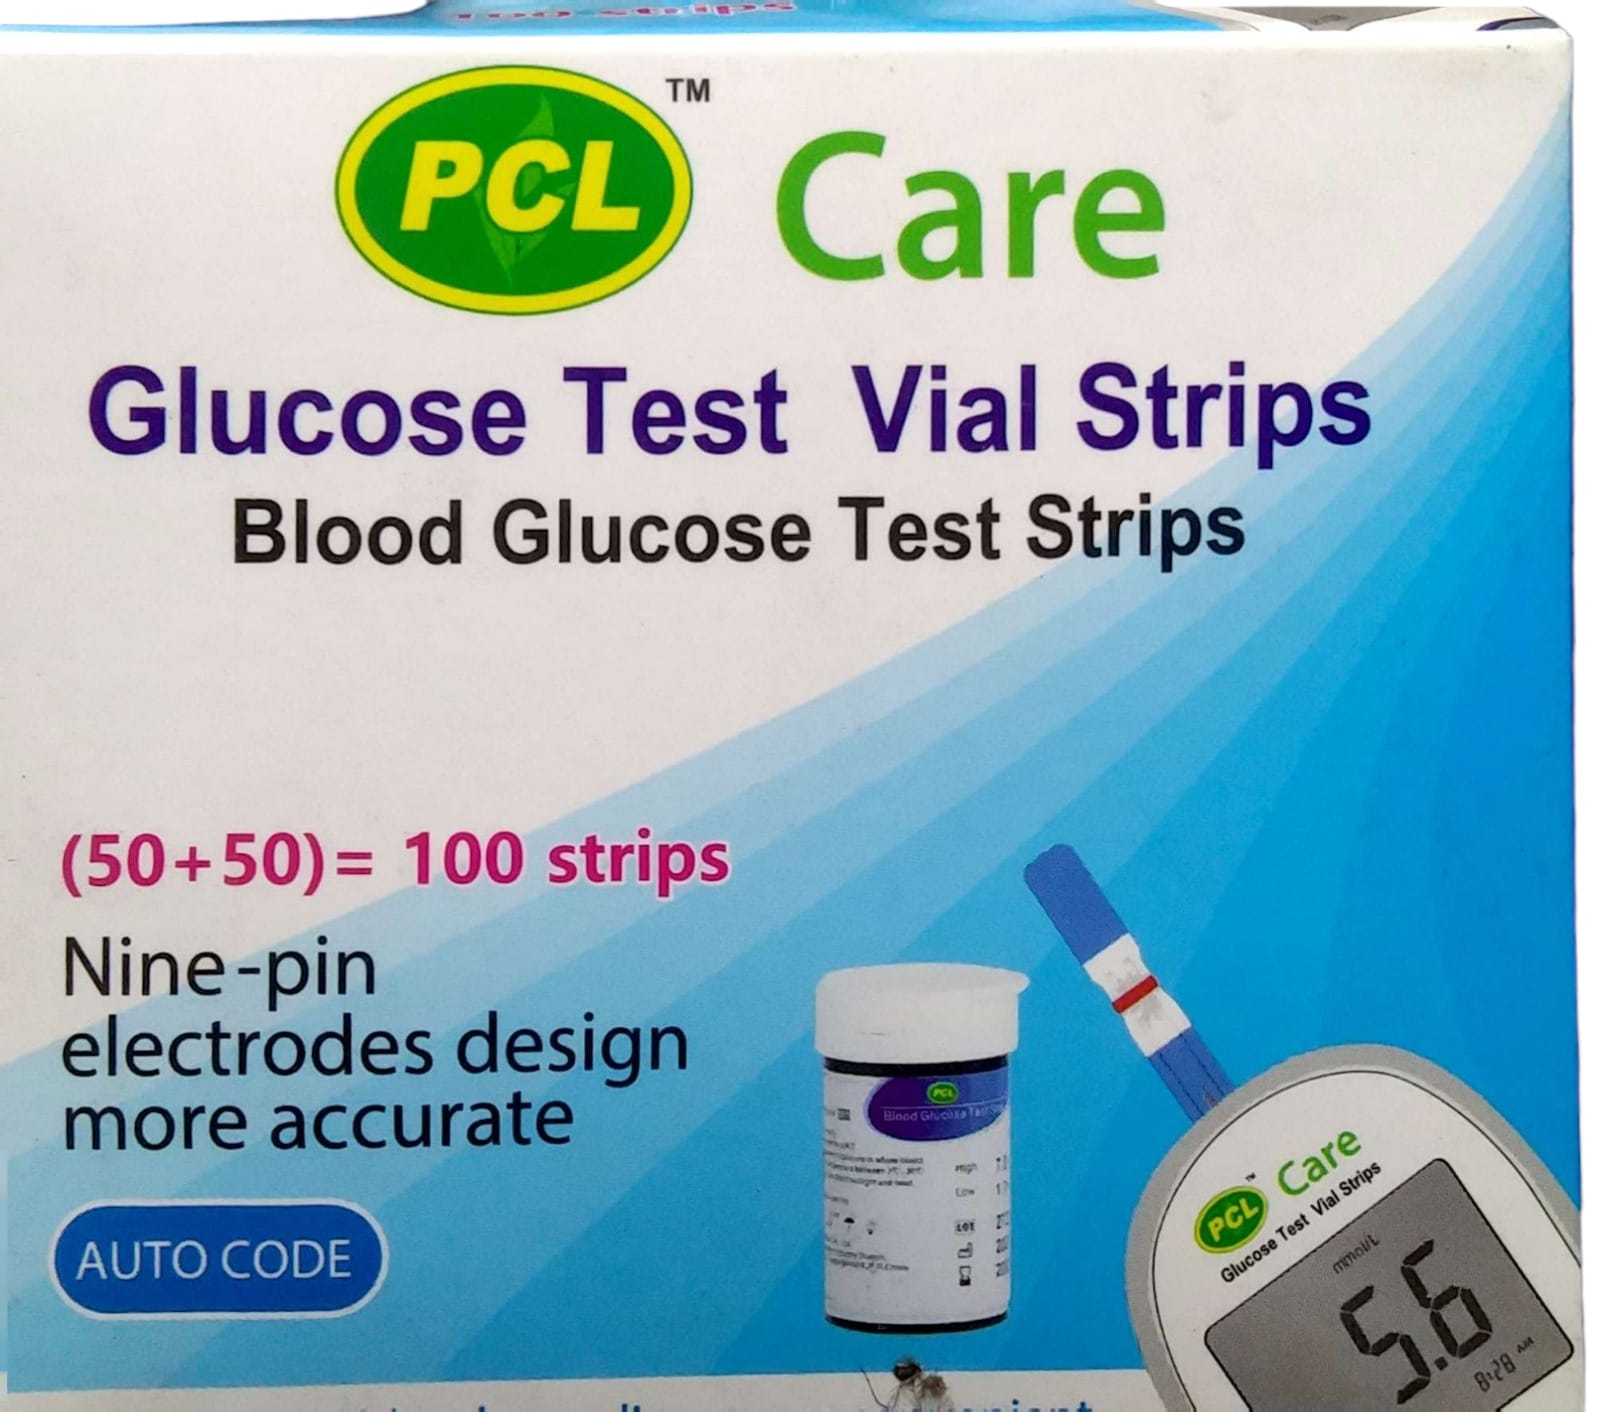 PCL Care Glucose Test Strips